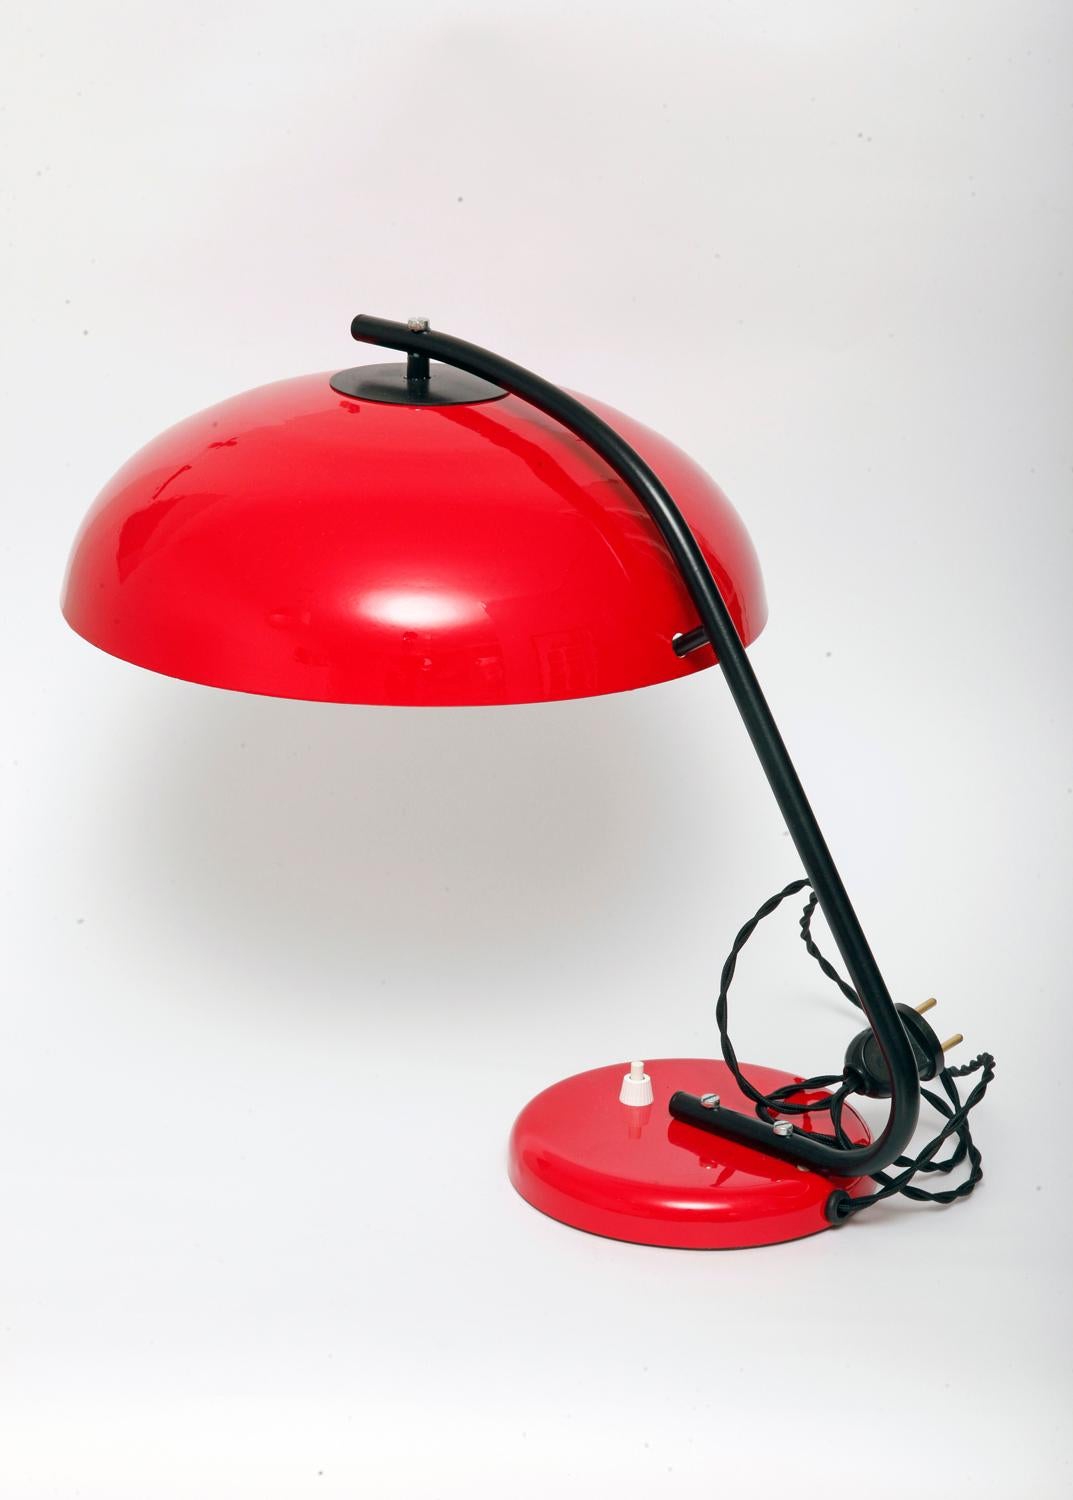 Polish desk lamp from the 1950s of the 20th century after a complete renovation. All made in metal, heavy lamp, solid stable. Renovation has been covered. Newly laid powder coating (just like car paints) on all parts of the lamp. The whole